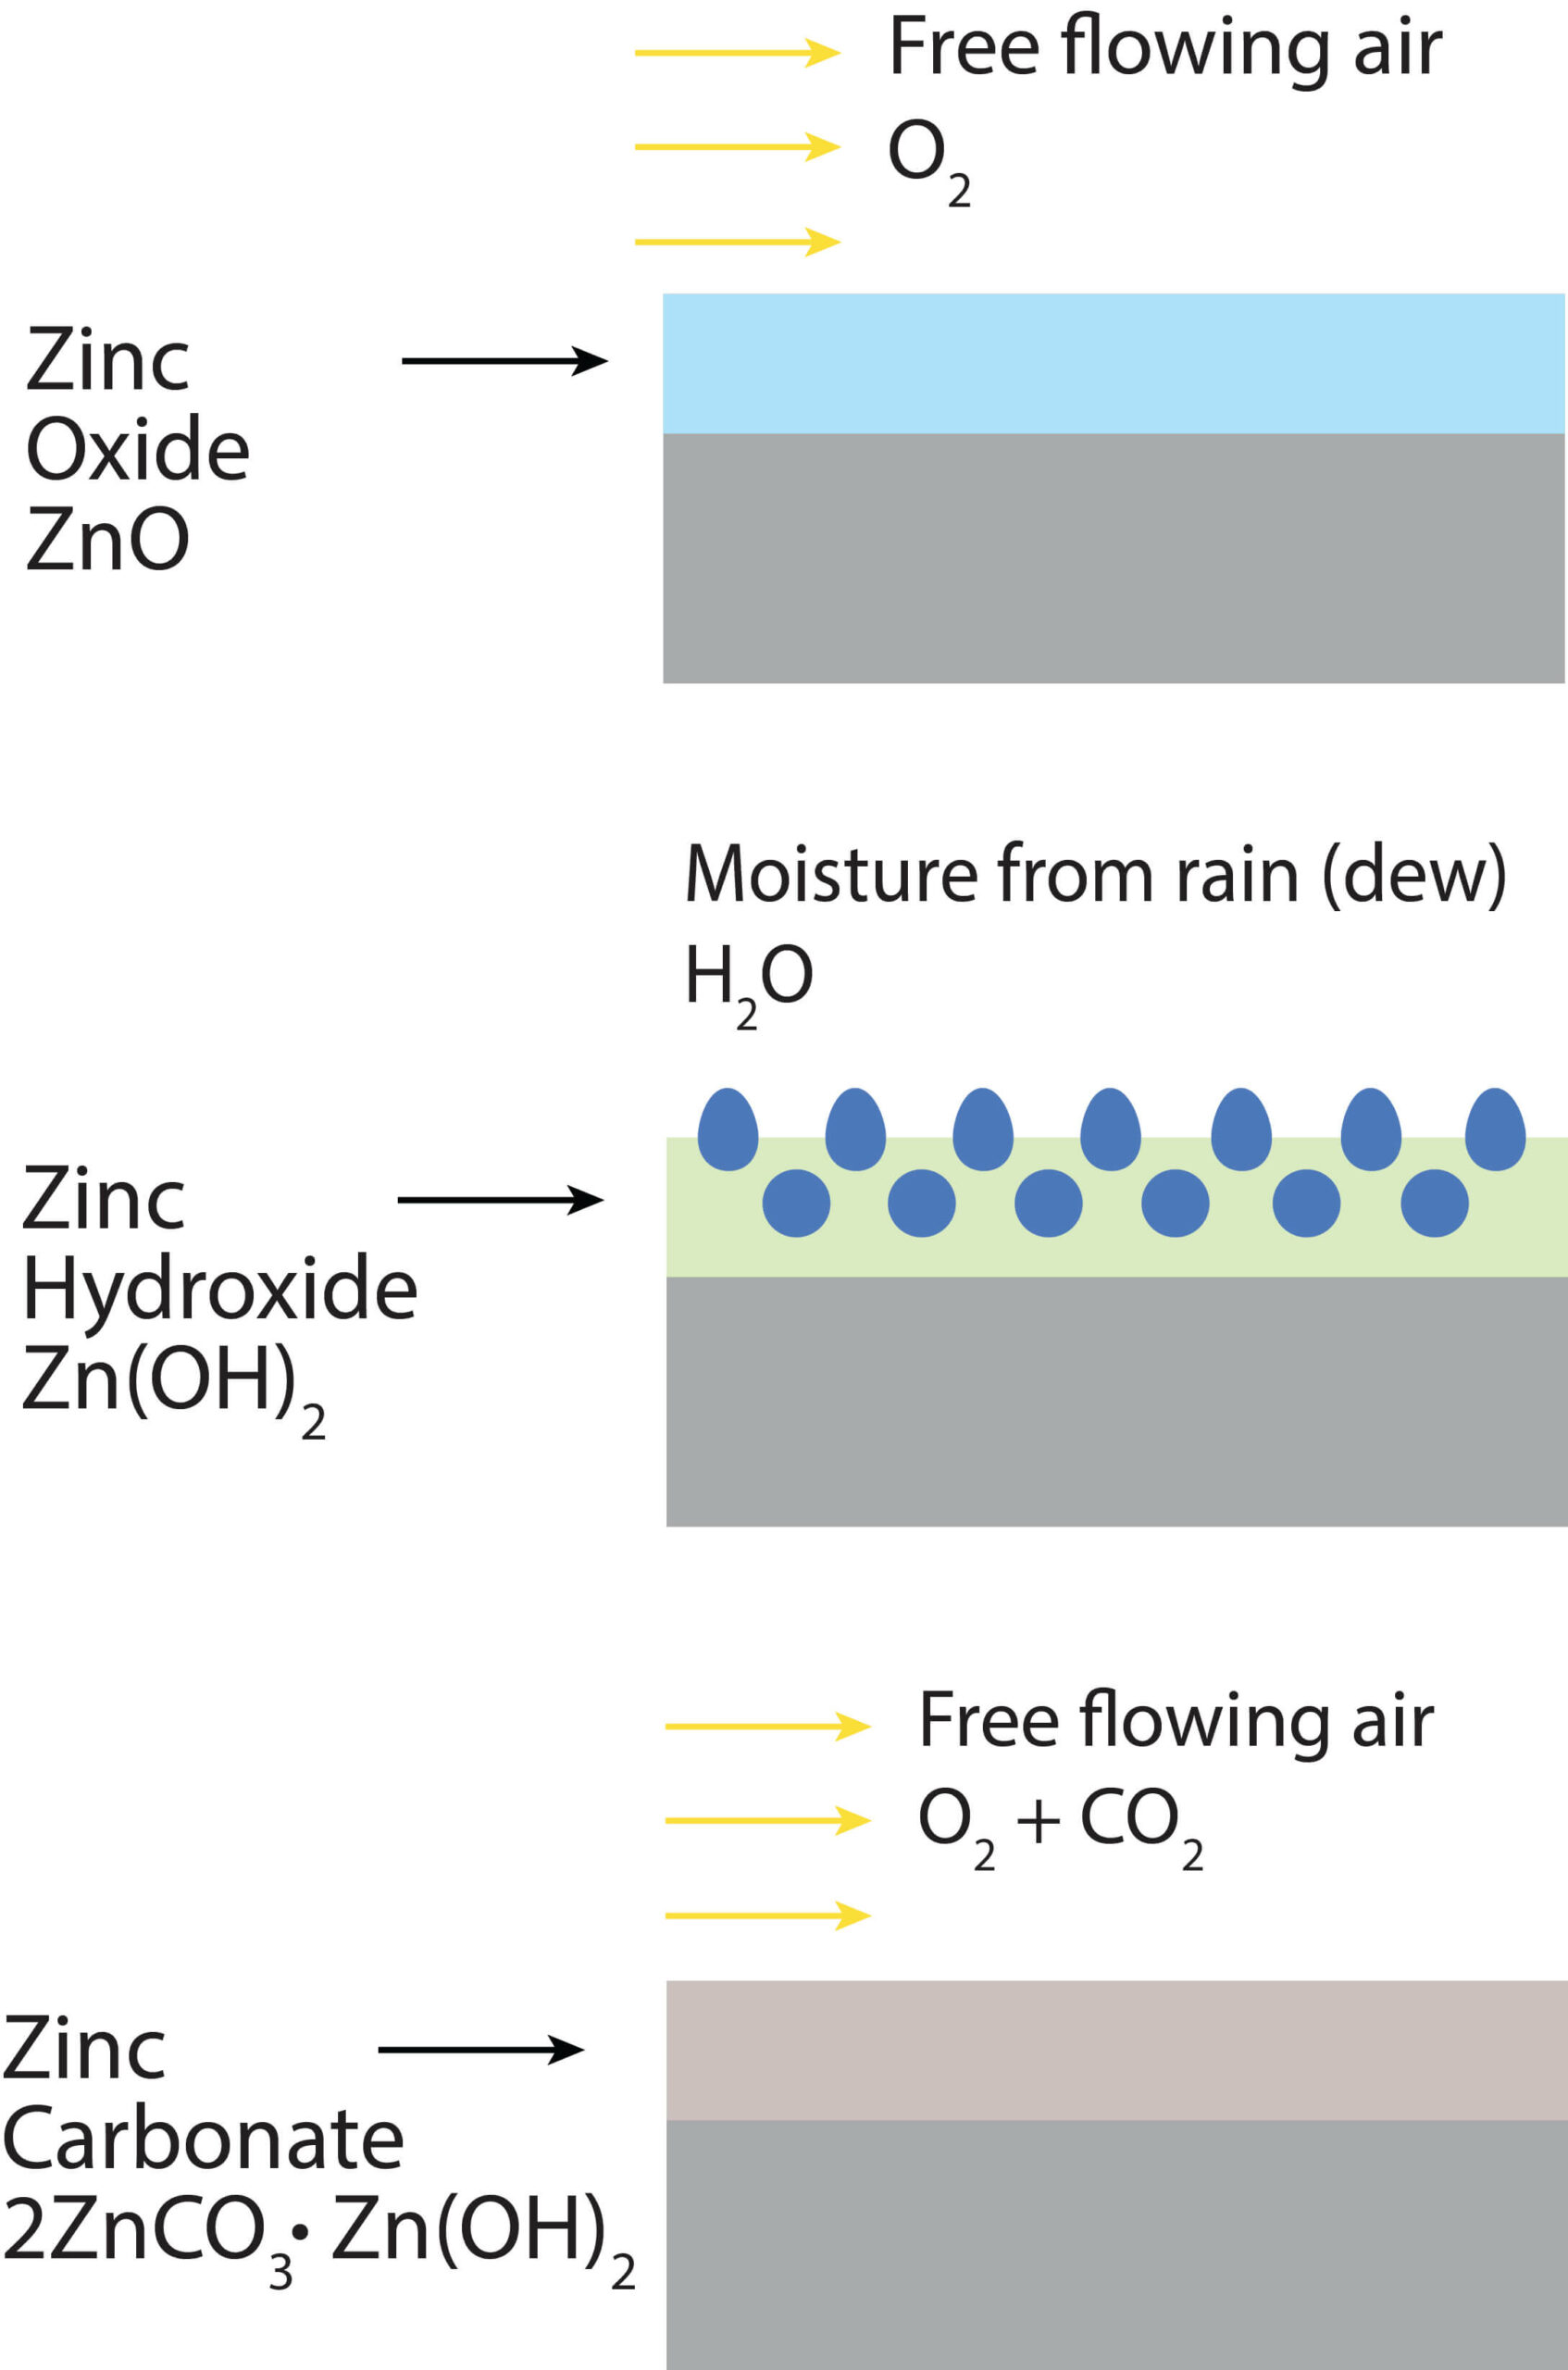 Figure 2. Zinc surface reacting with air and moisture to create a protective zinc carbonate layer.